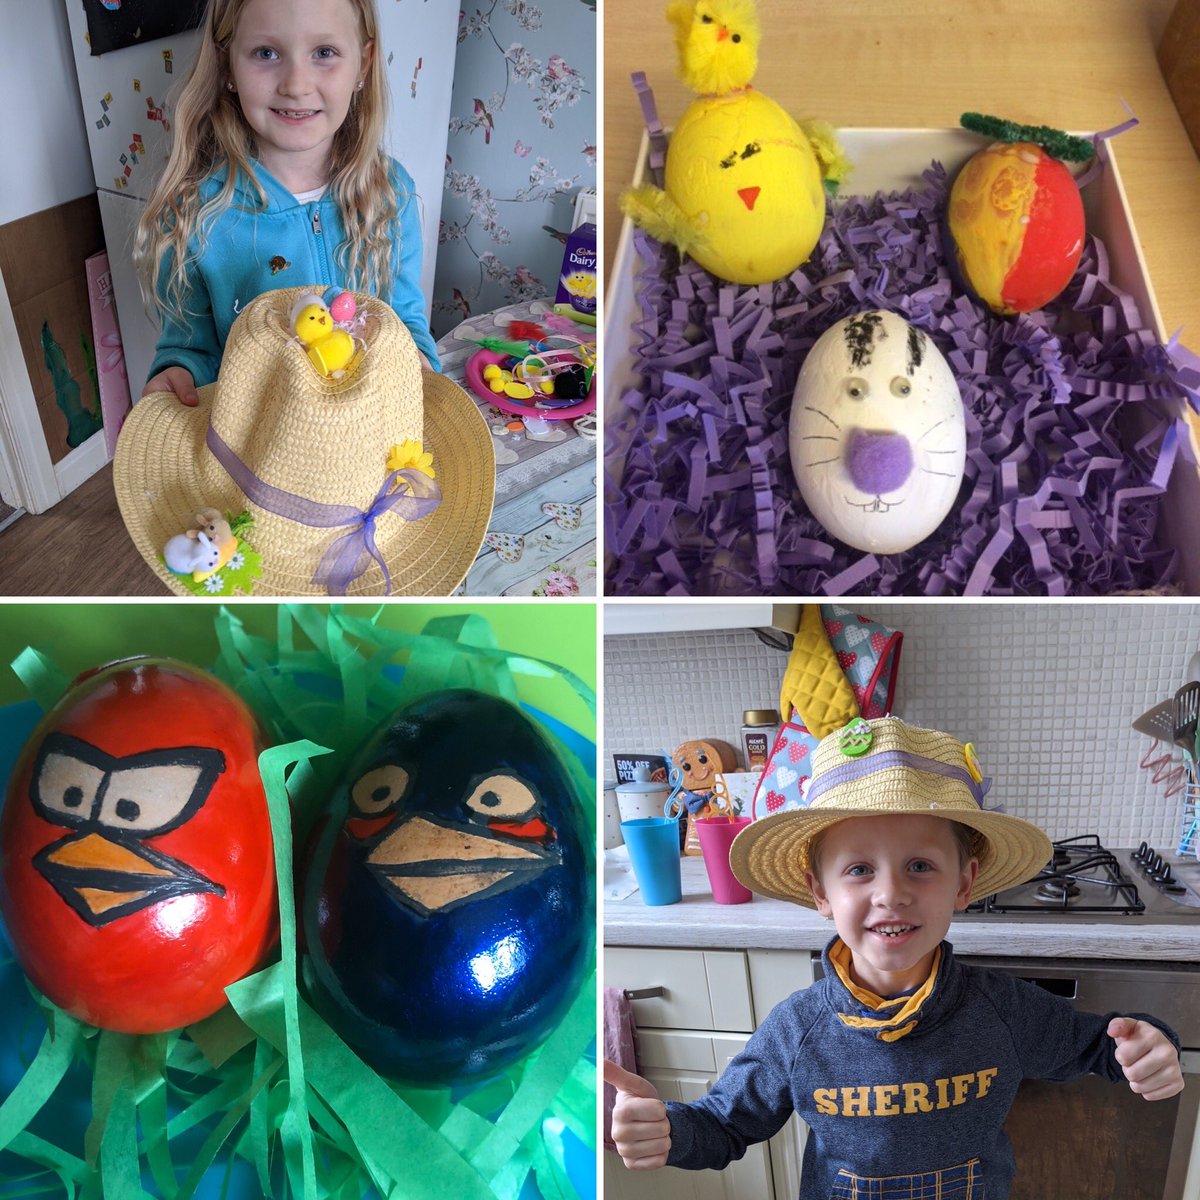 Well done to everybody who has sent in photos of their decorated eggs or Easter bonnets. There are some fantastic creations! 🎨🐣 #Easter #decoratedegg #Easterbonnets #creative